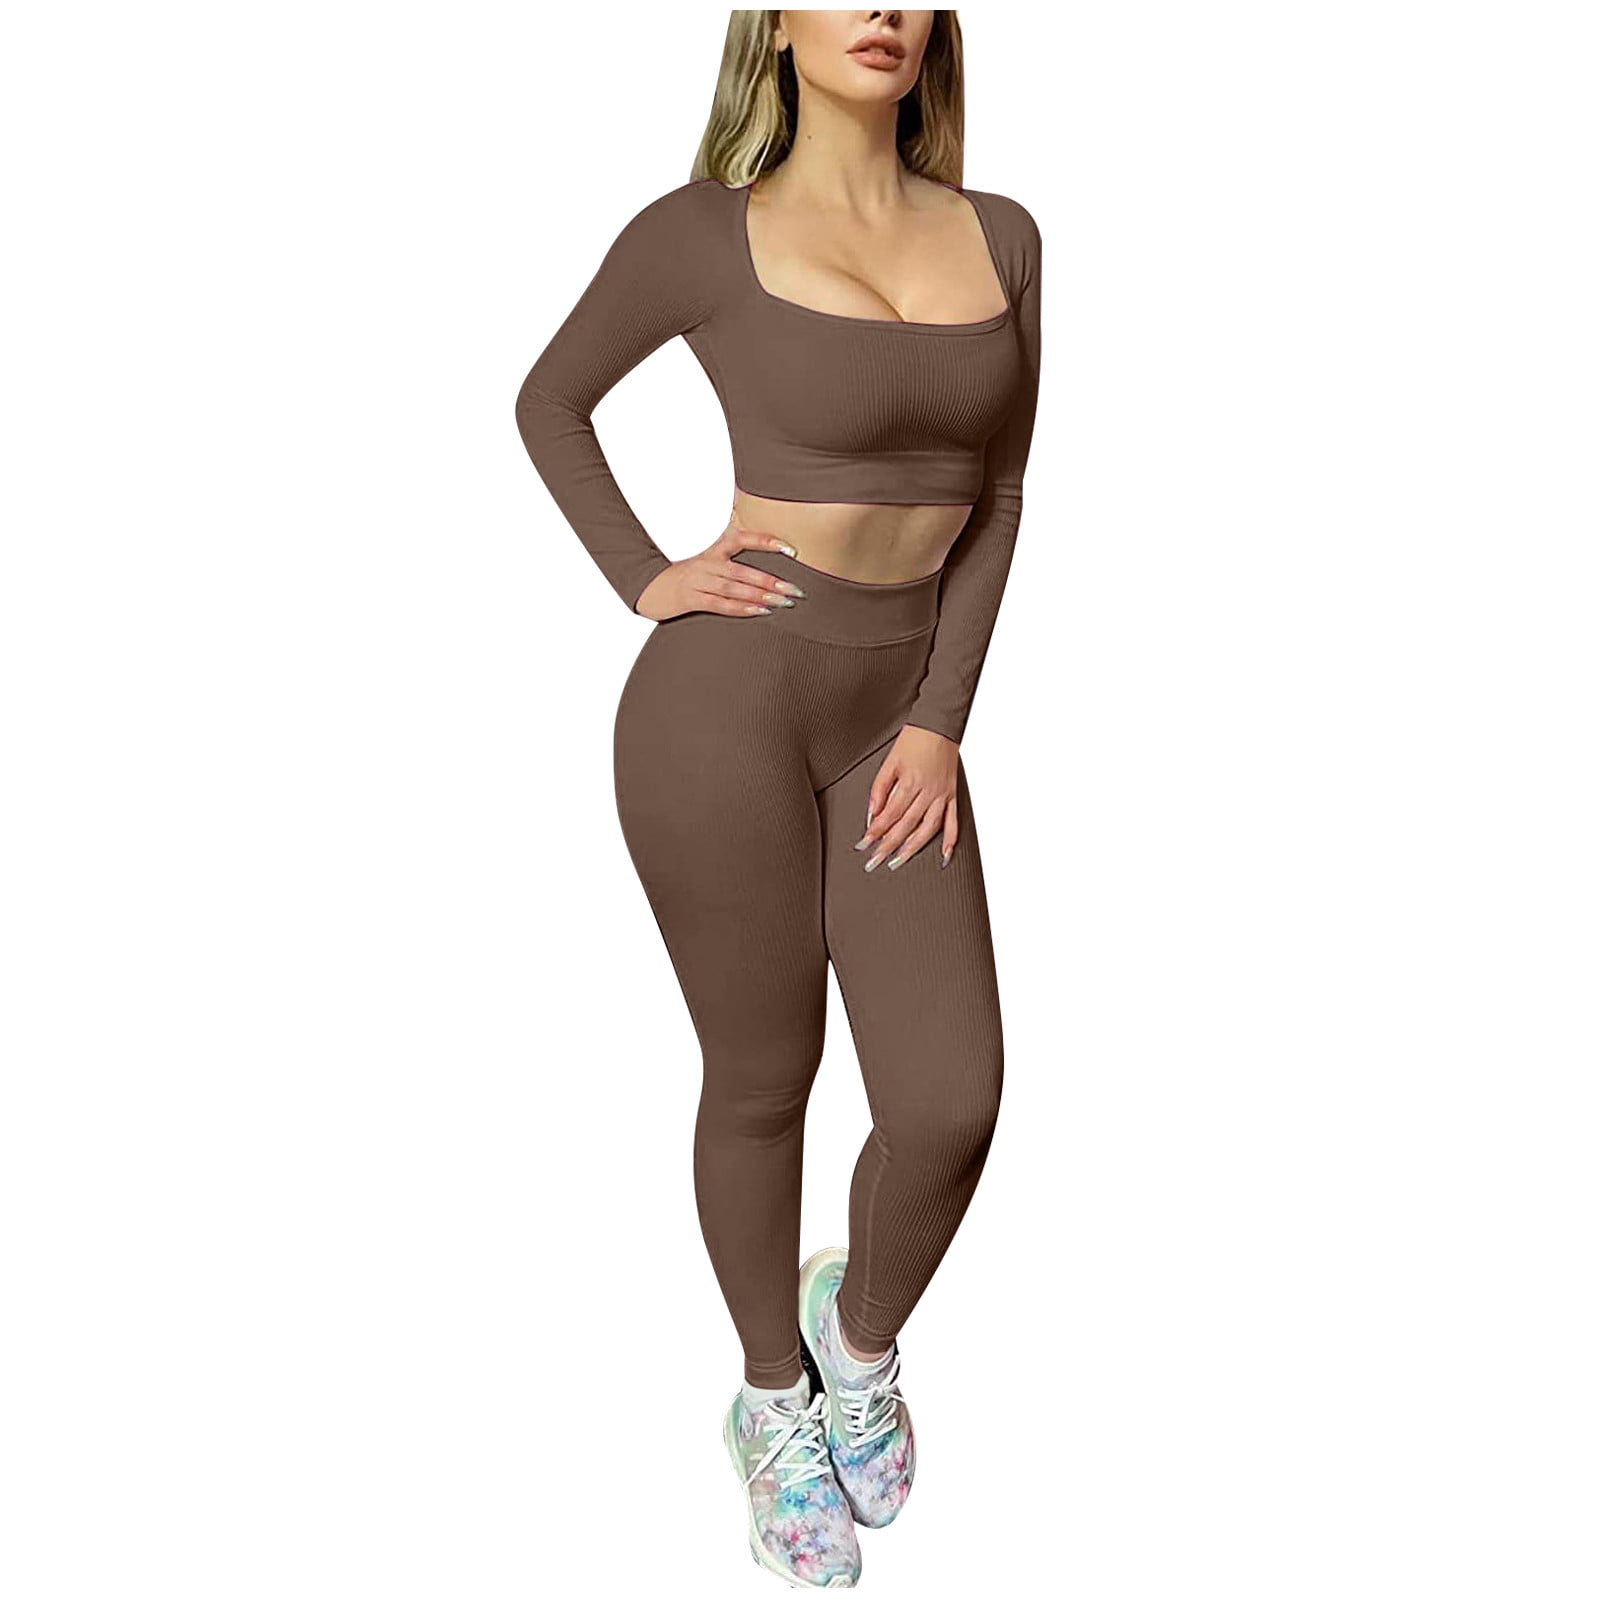 Modest Active Wear Seamless Cycling Yoga Sets Gym Fitness Clothes for  Female, Womens Short Sleeves Crop Top and Shorts Running Tennis Sports  Outfits  - China Seamless Active Wear Set and Biker